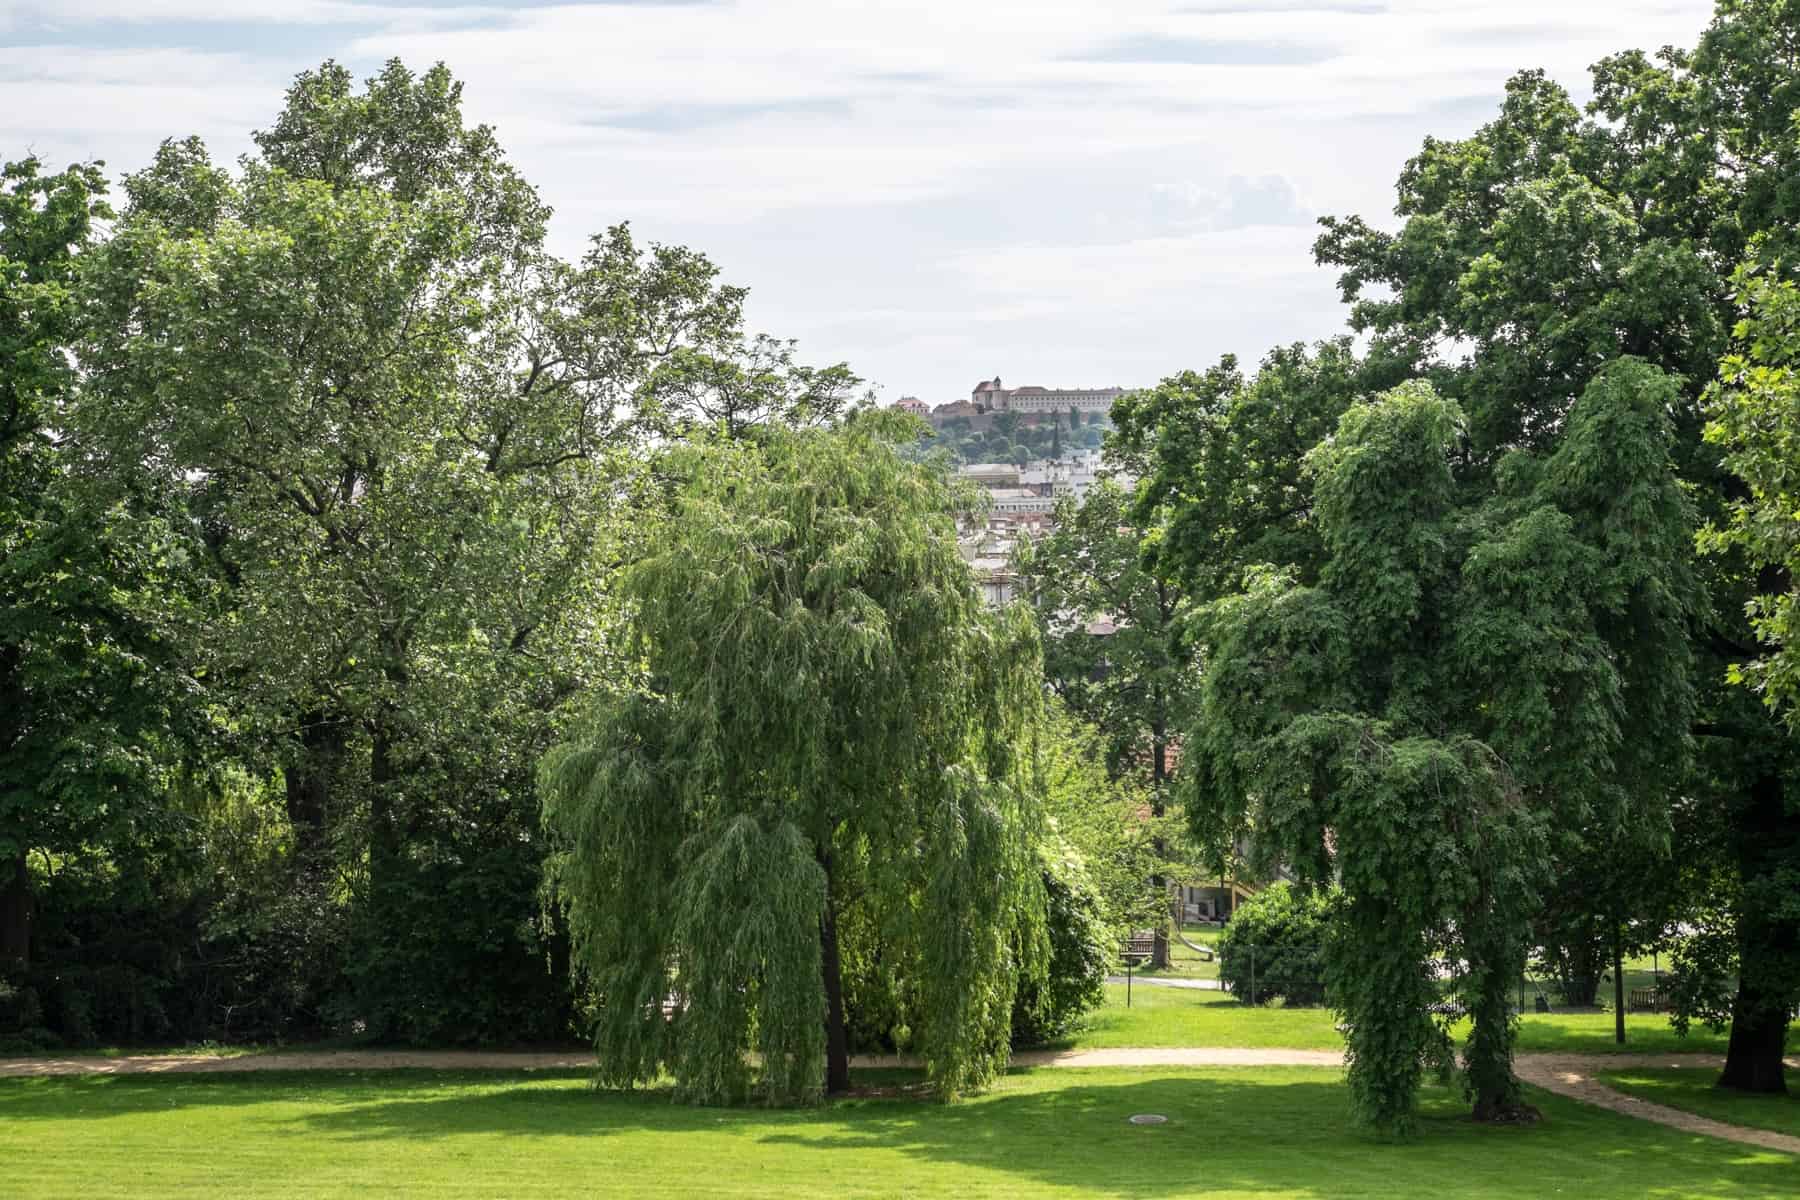 View from a manicured garden with large, bushy trees, looking towards a city skyline and elevated castle in the distance. 